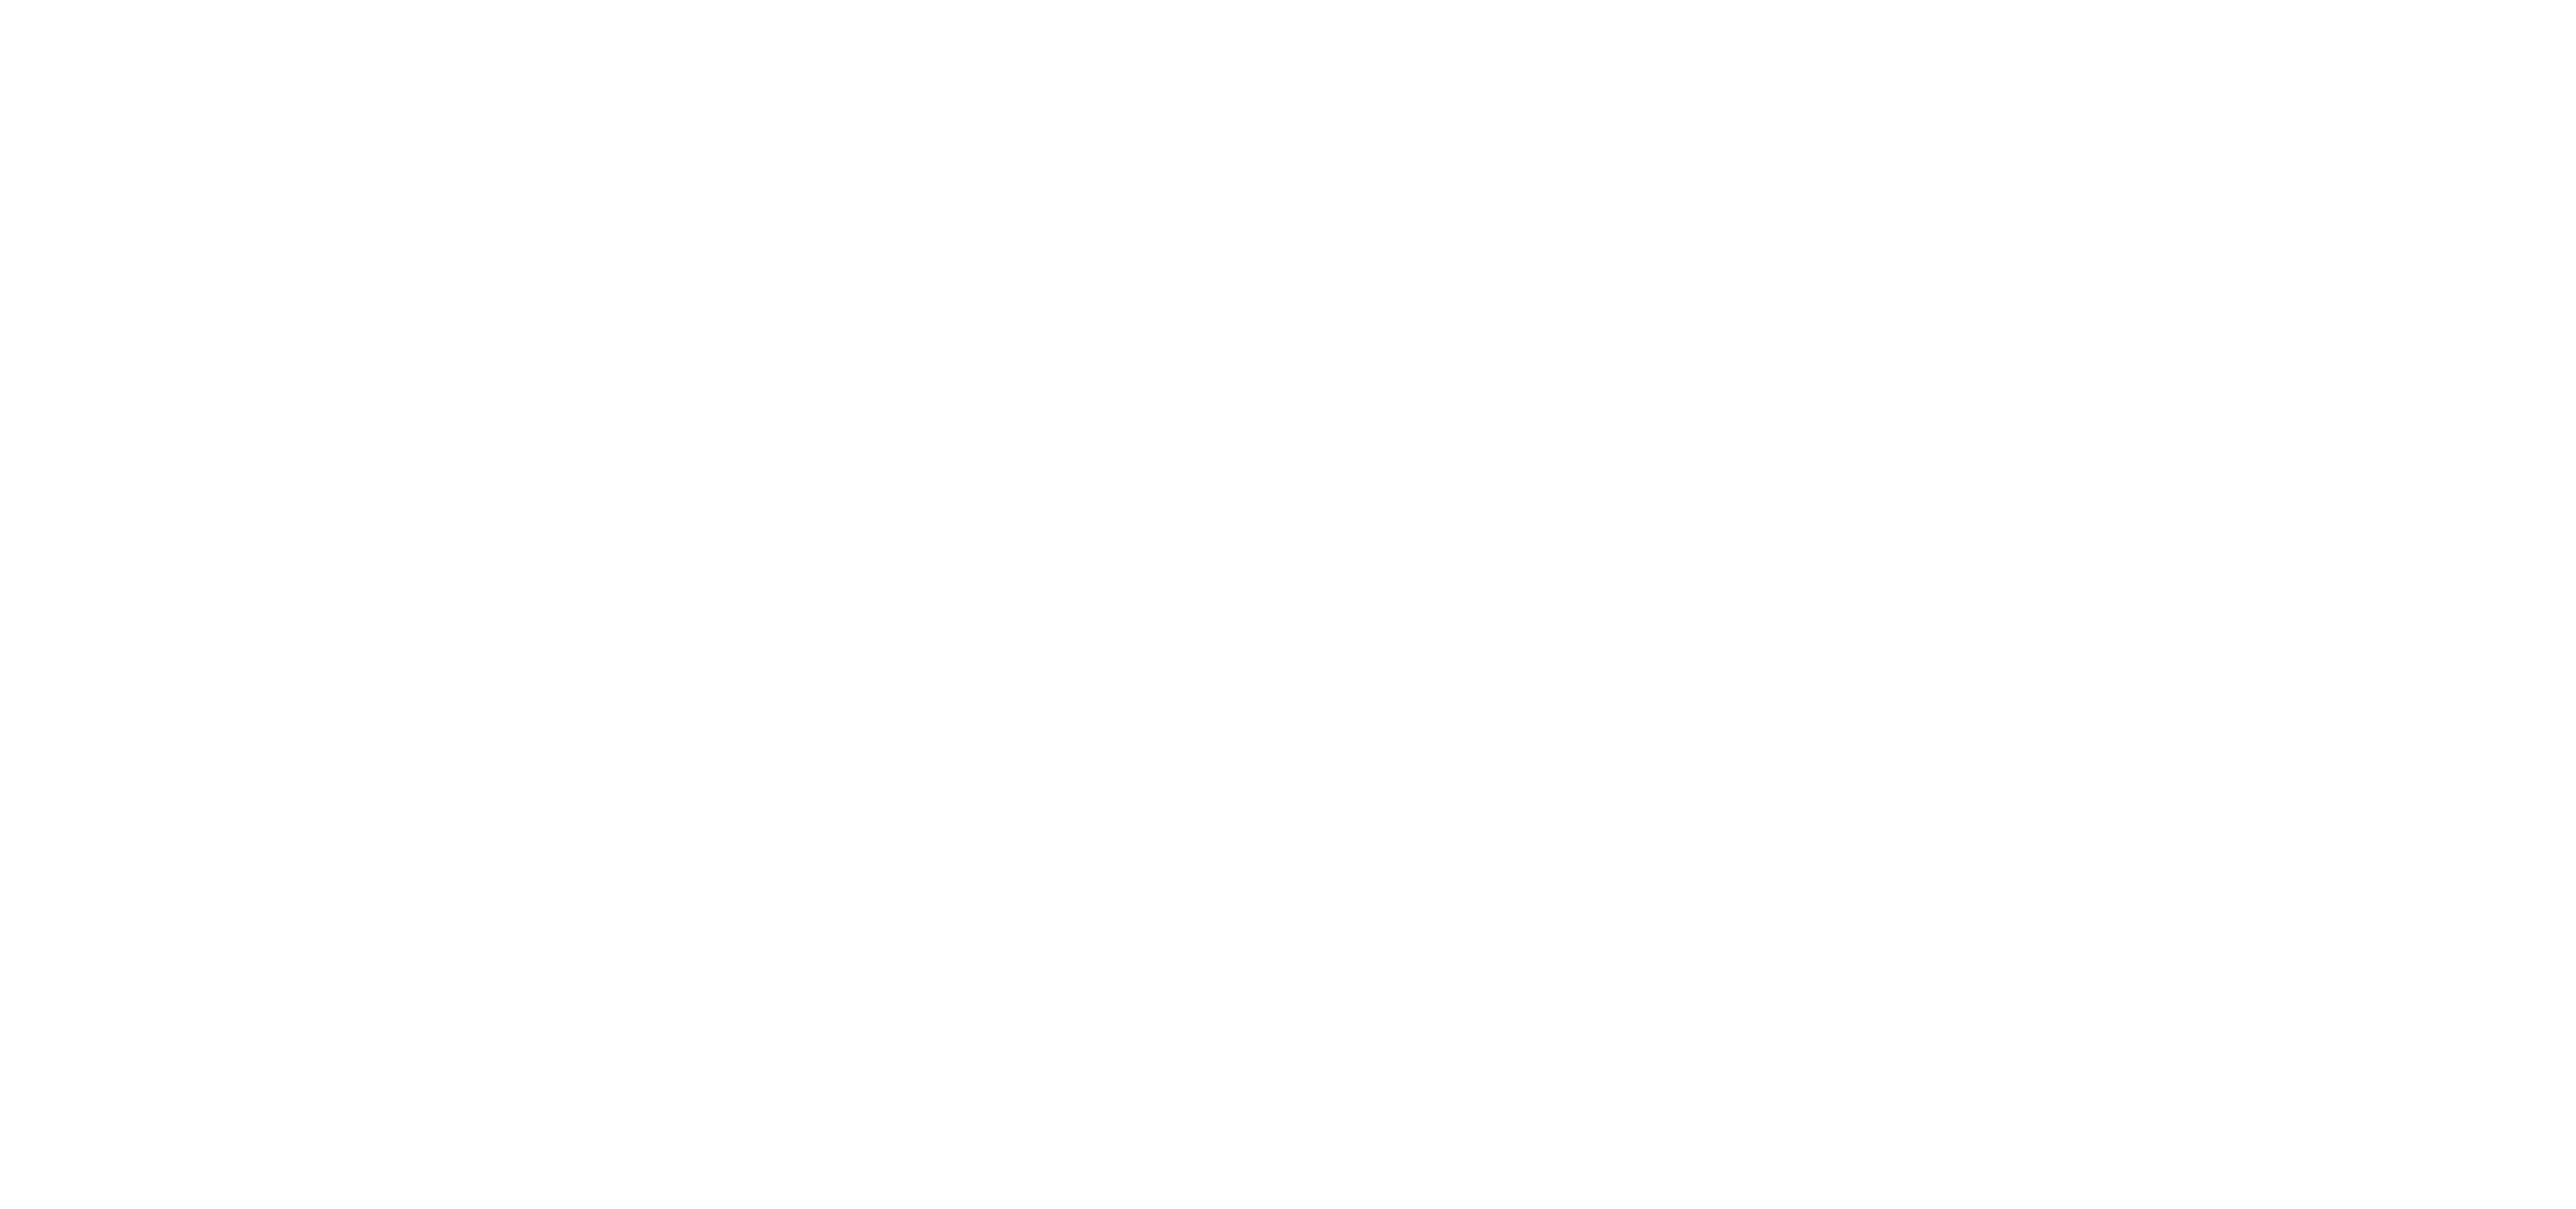 Another header for Monolith. Looks good!